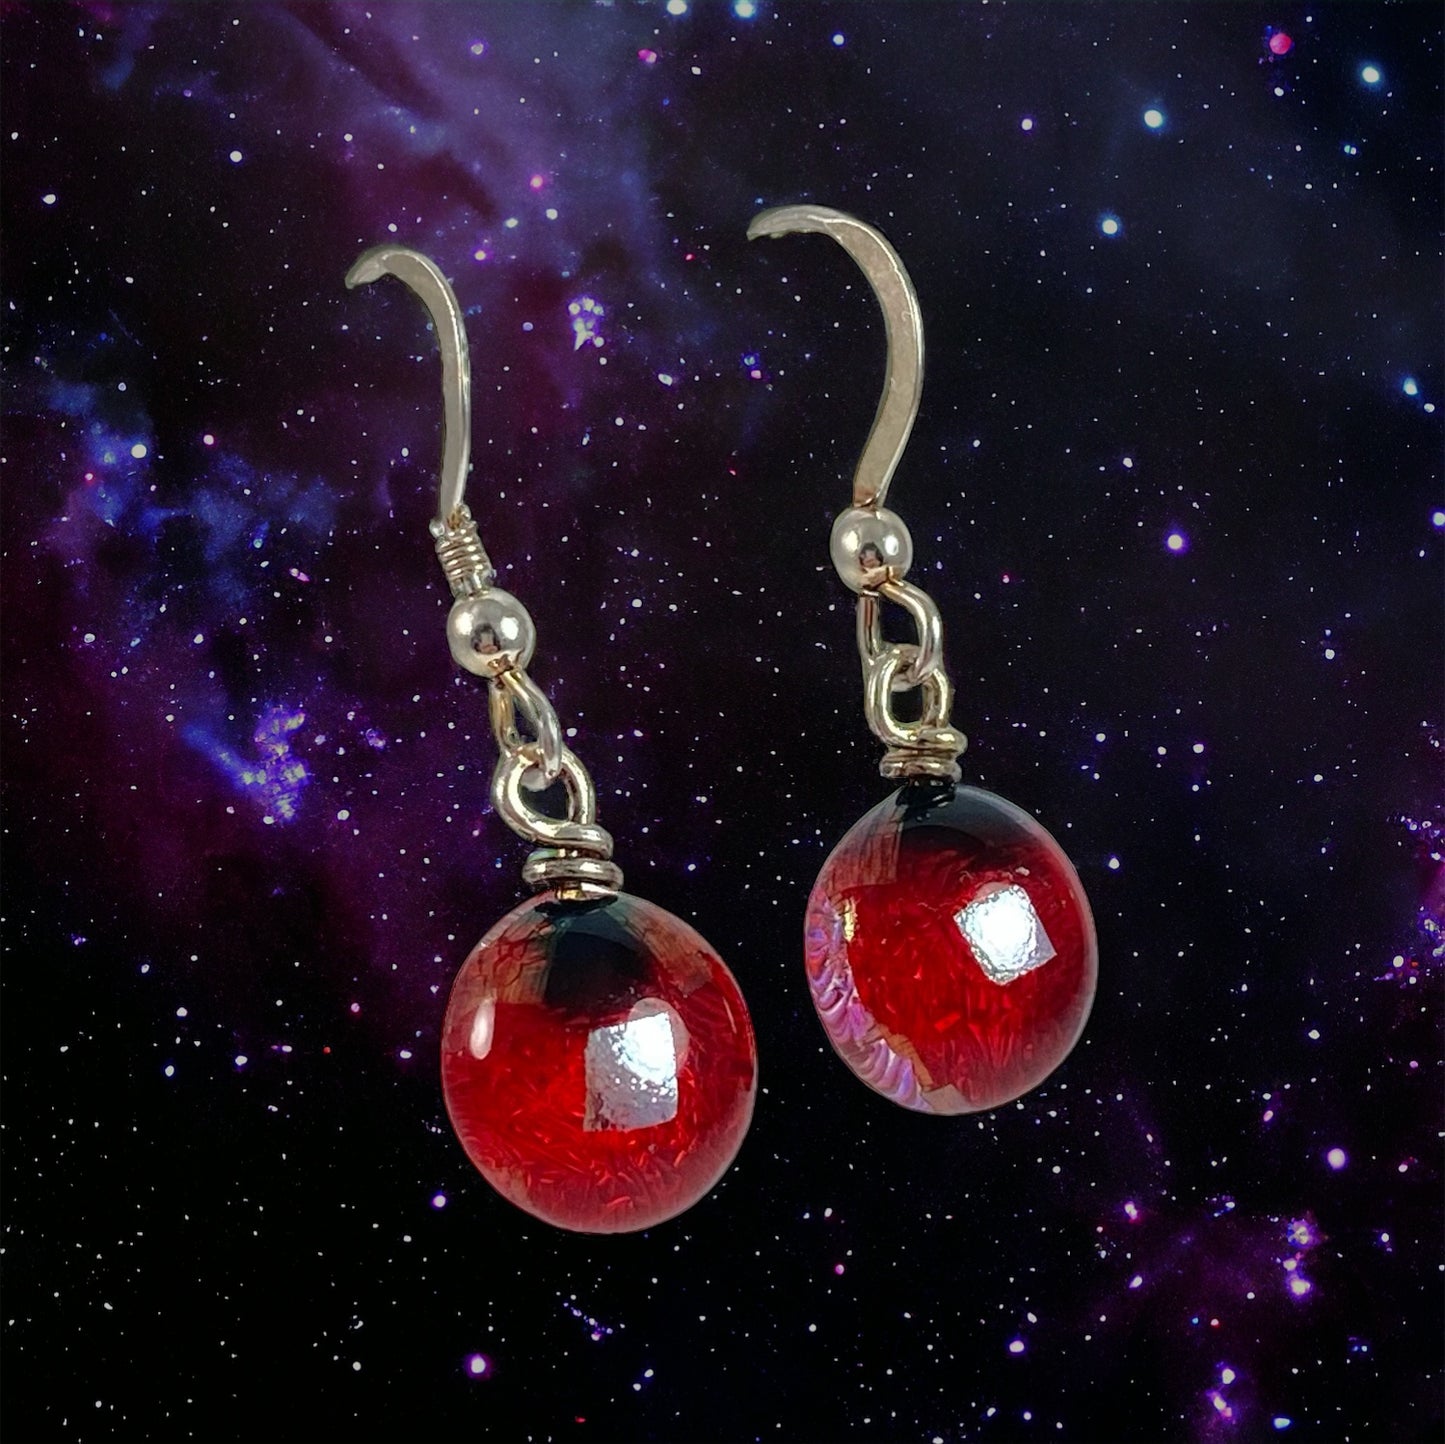 Space Ball Earrings in Cherry Red